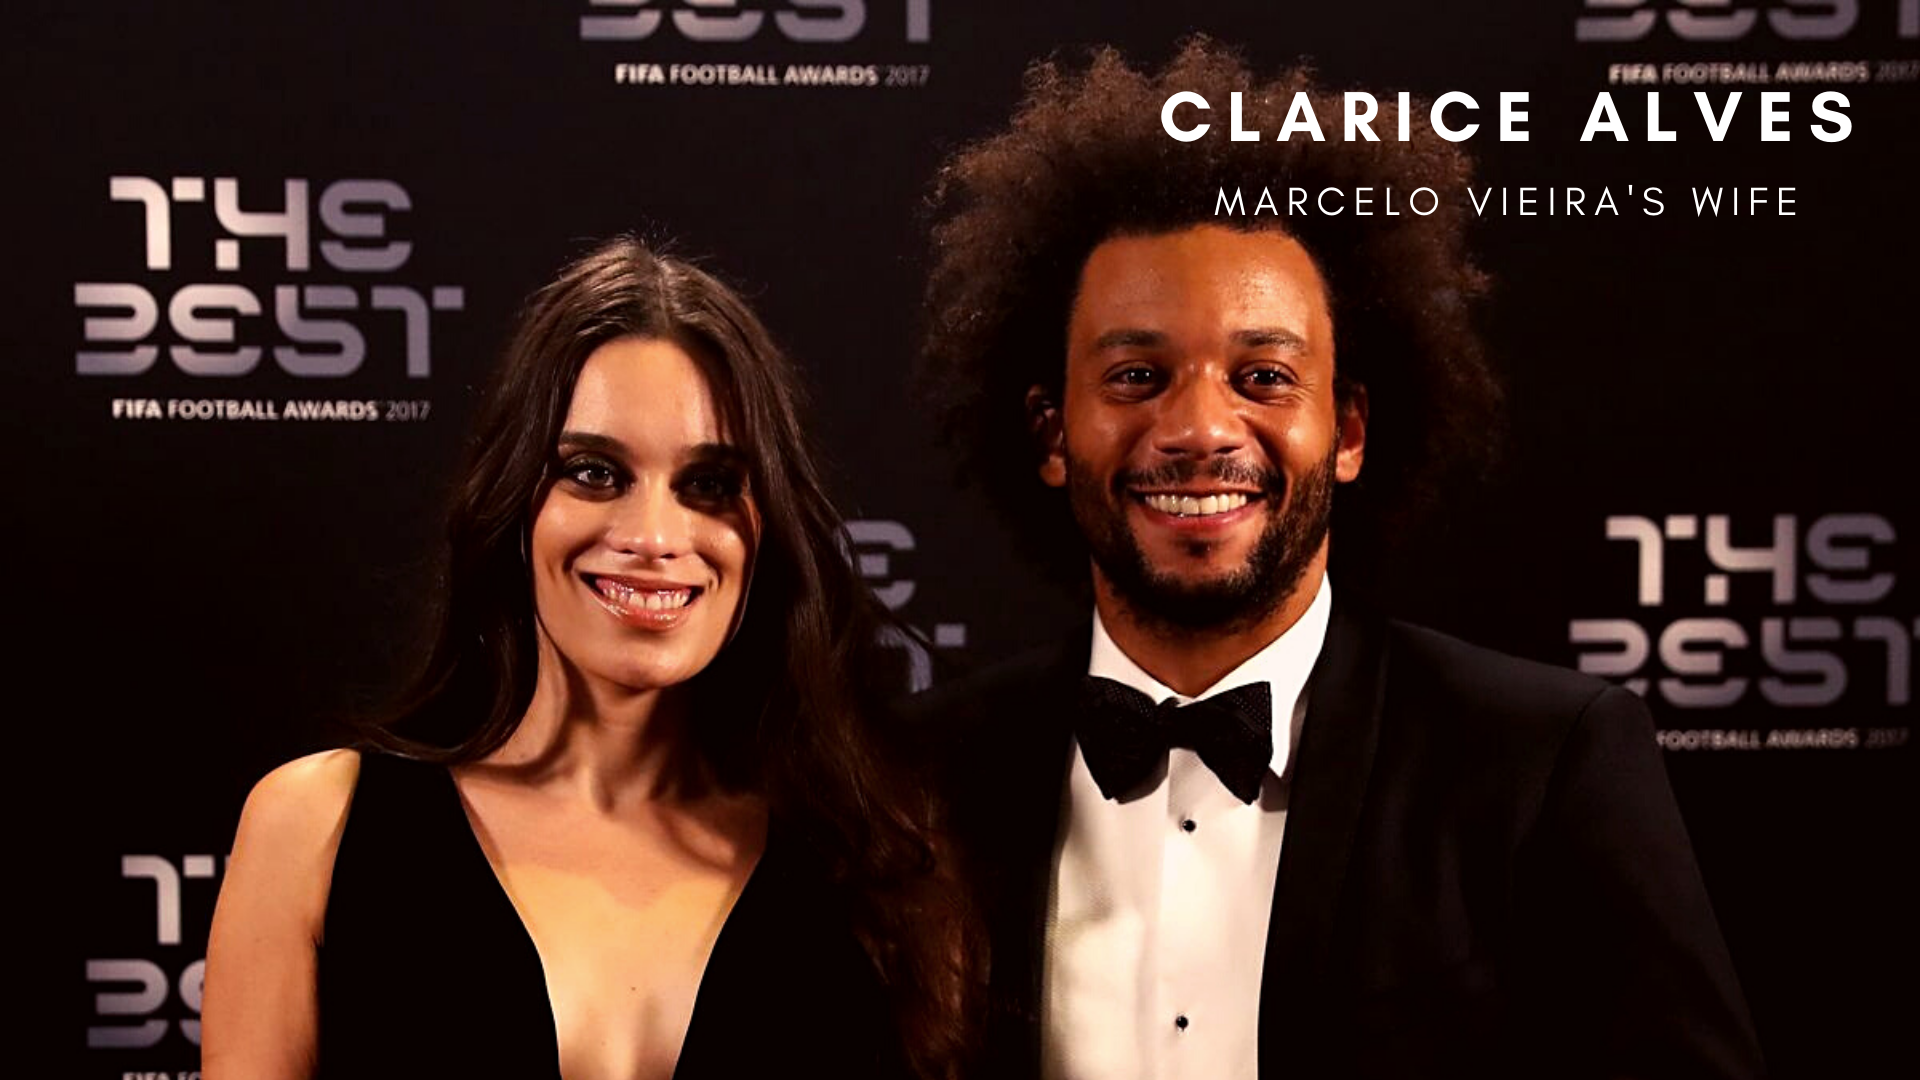 Marcelo Vieira with wife Clarice Alves. (Credit: Getty Images)